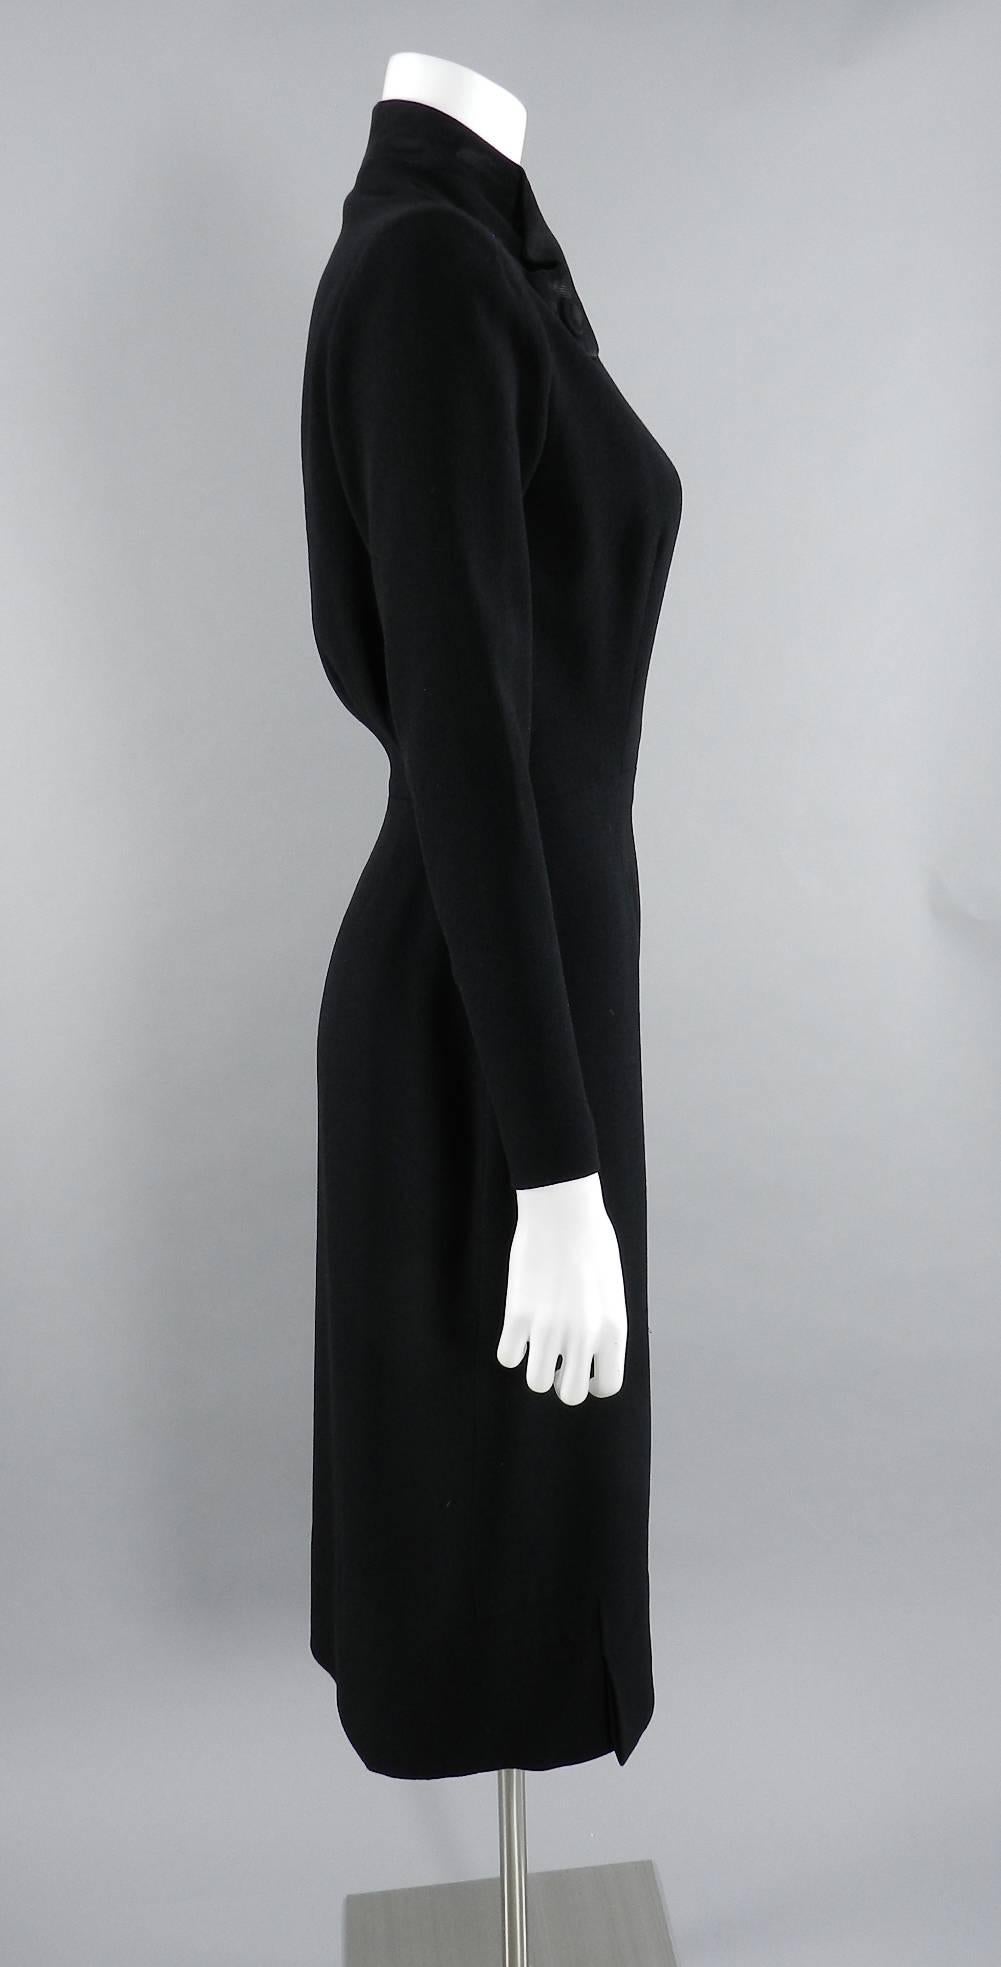 Pierre Balmain Haute Couture Black Wool Dress, 1950s  In Excellent Condition For Sale In Toronto, ON